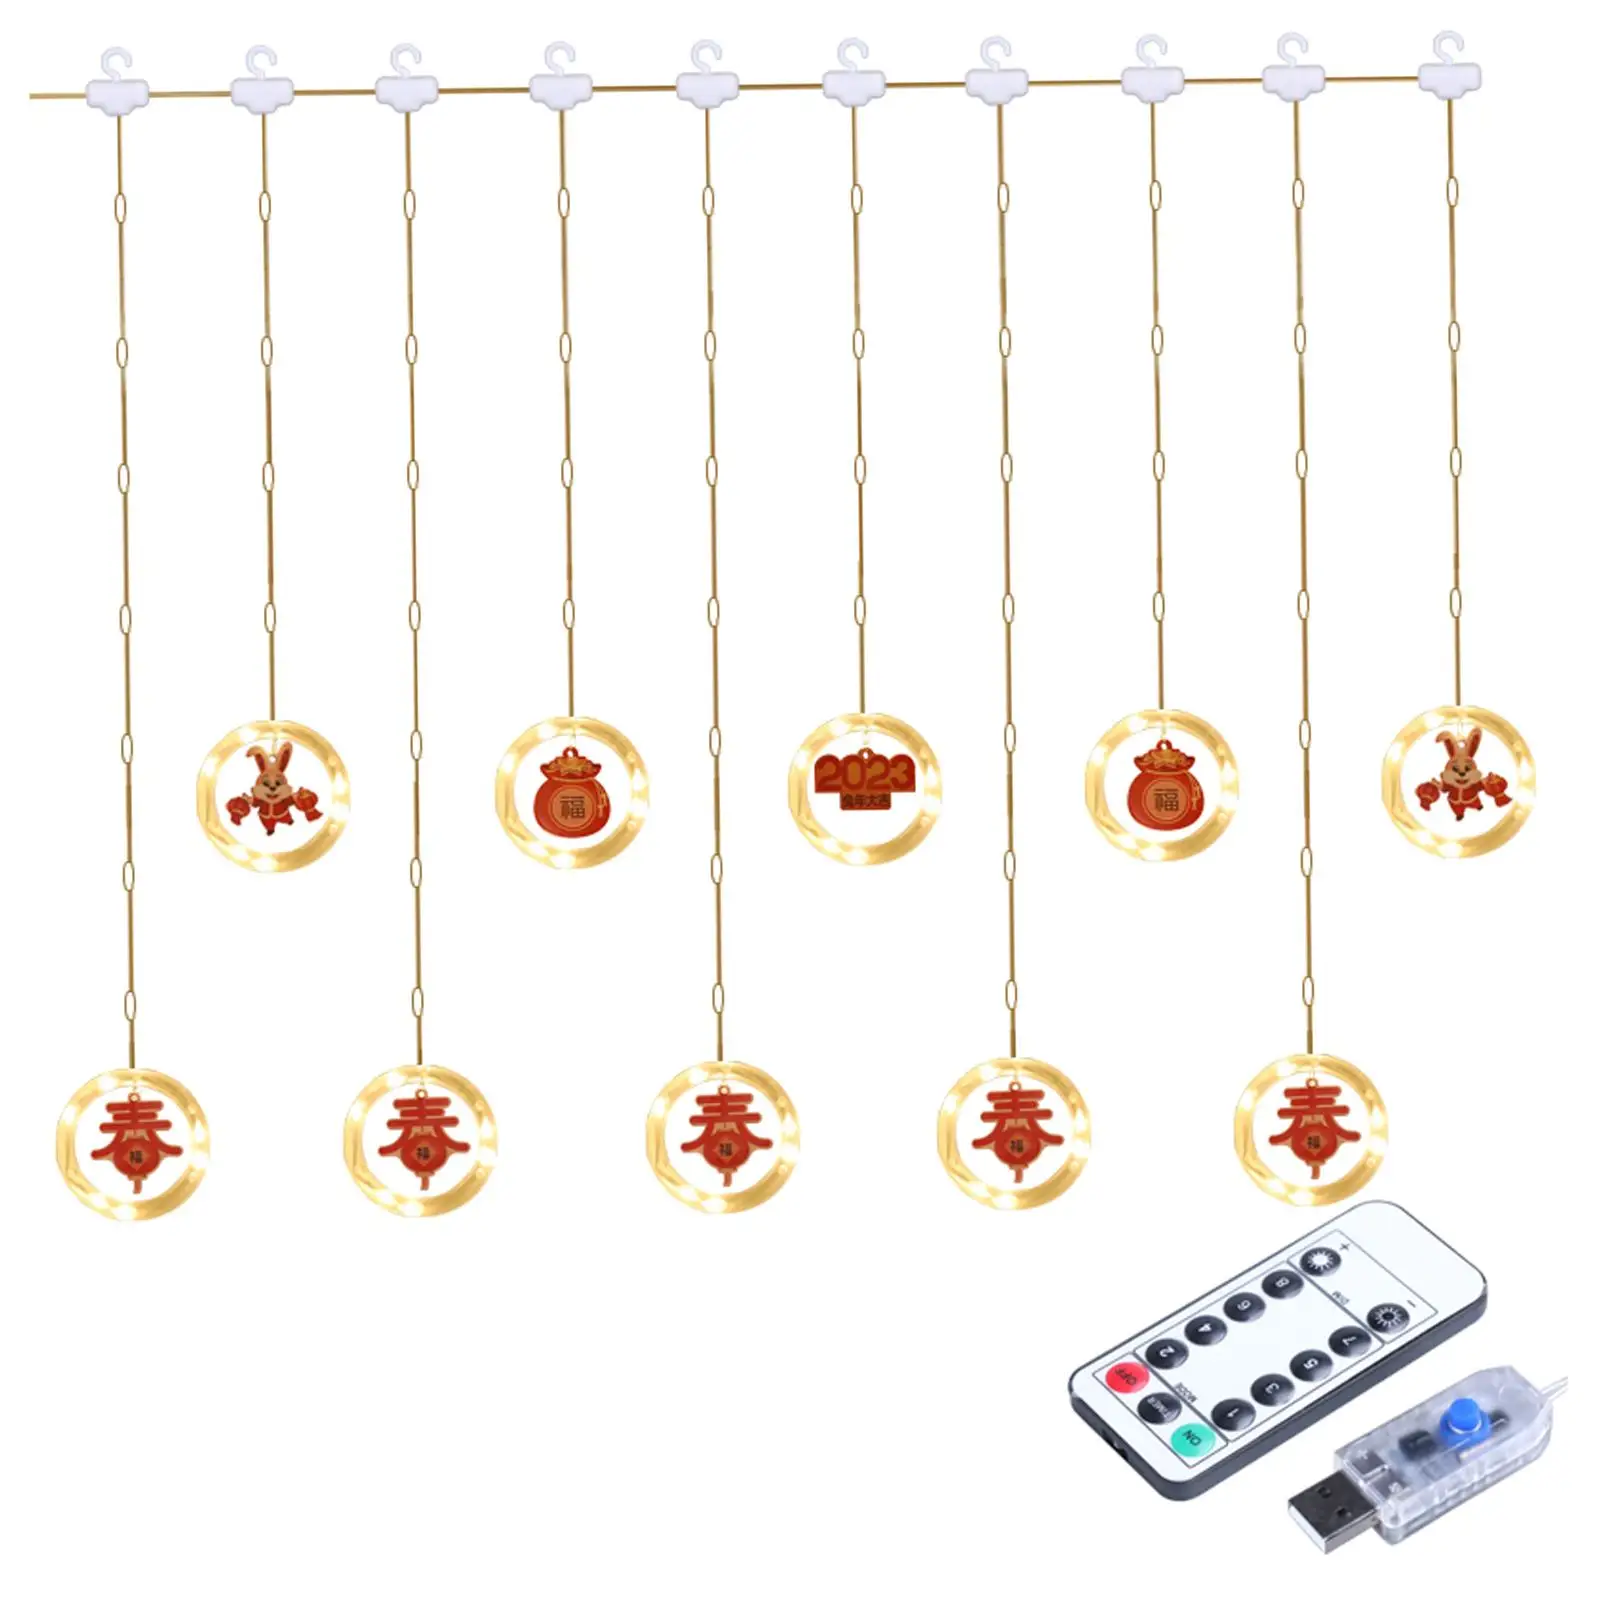 LED Chinese Spring Festival String Light Warm White Lighting Remote Control Lamp Ornament for Yard Bar Bedroom Decoration